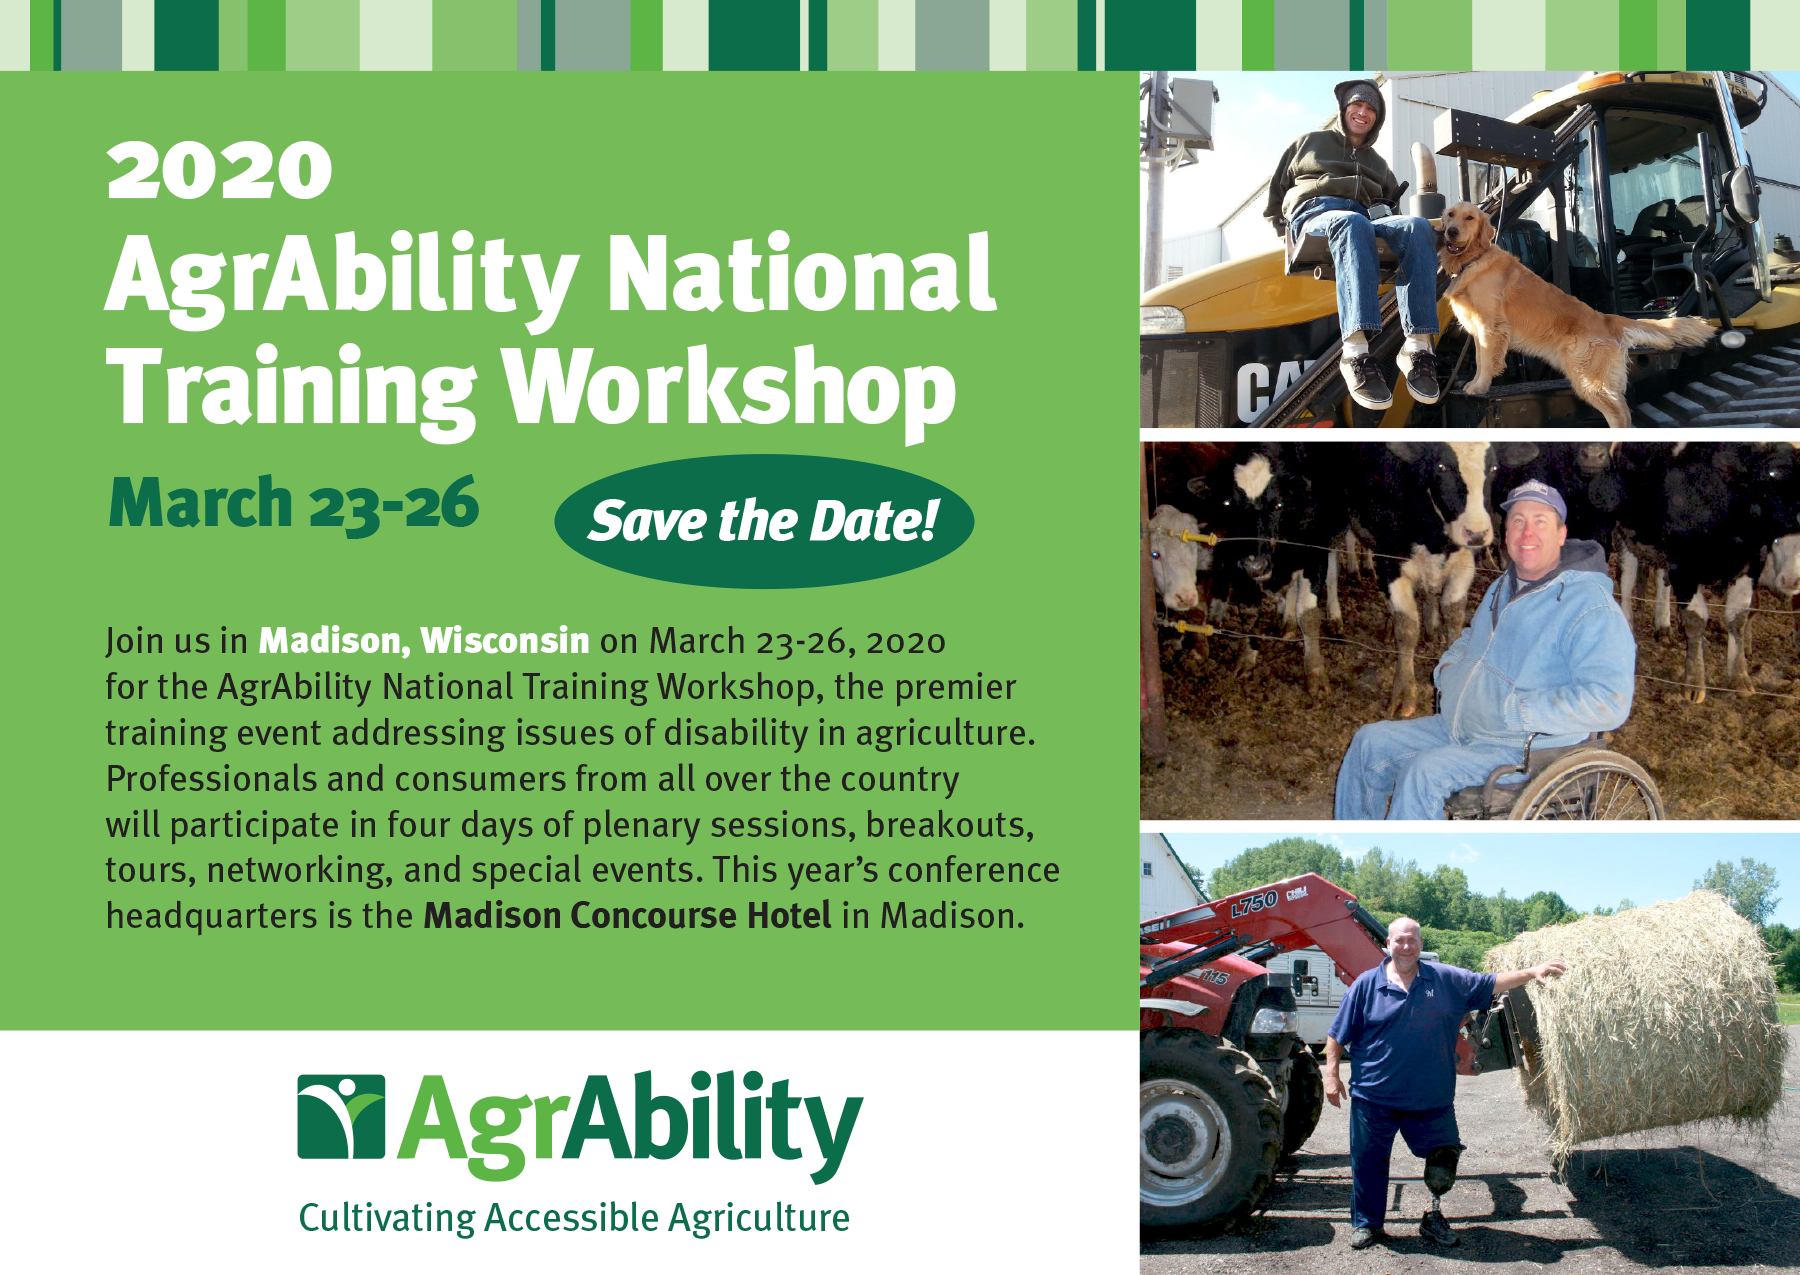 AgrAbility National Training Workshop Opportunity @ Madison Concourse Hotel